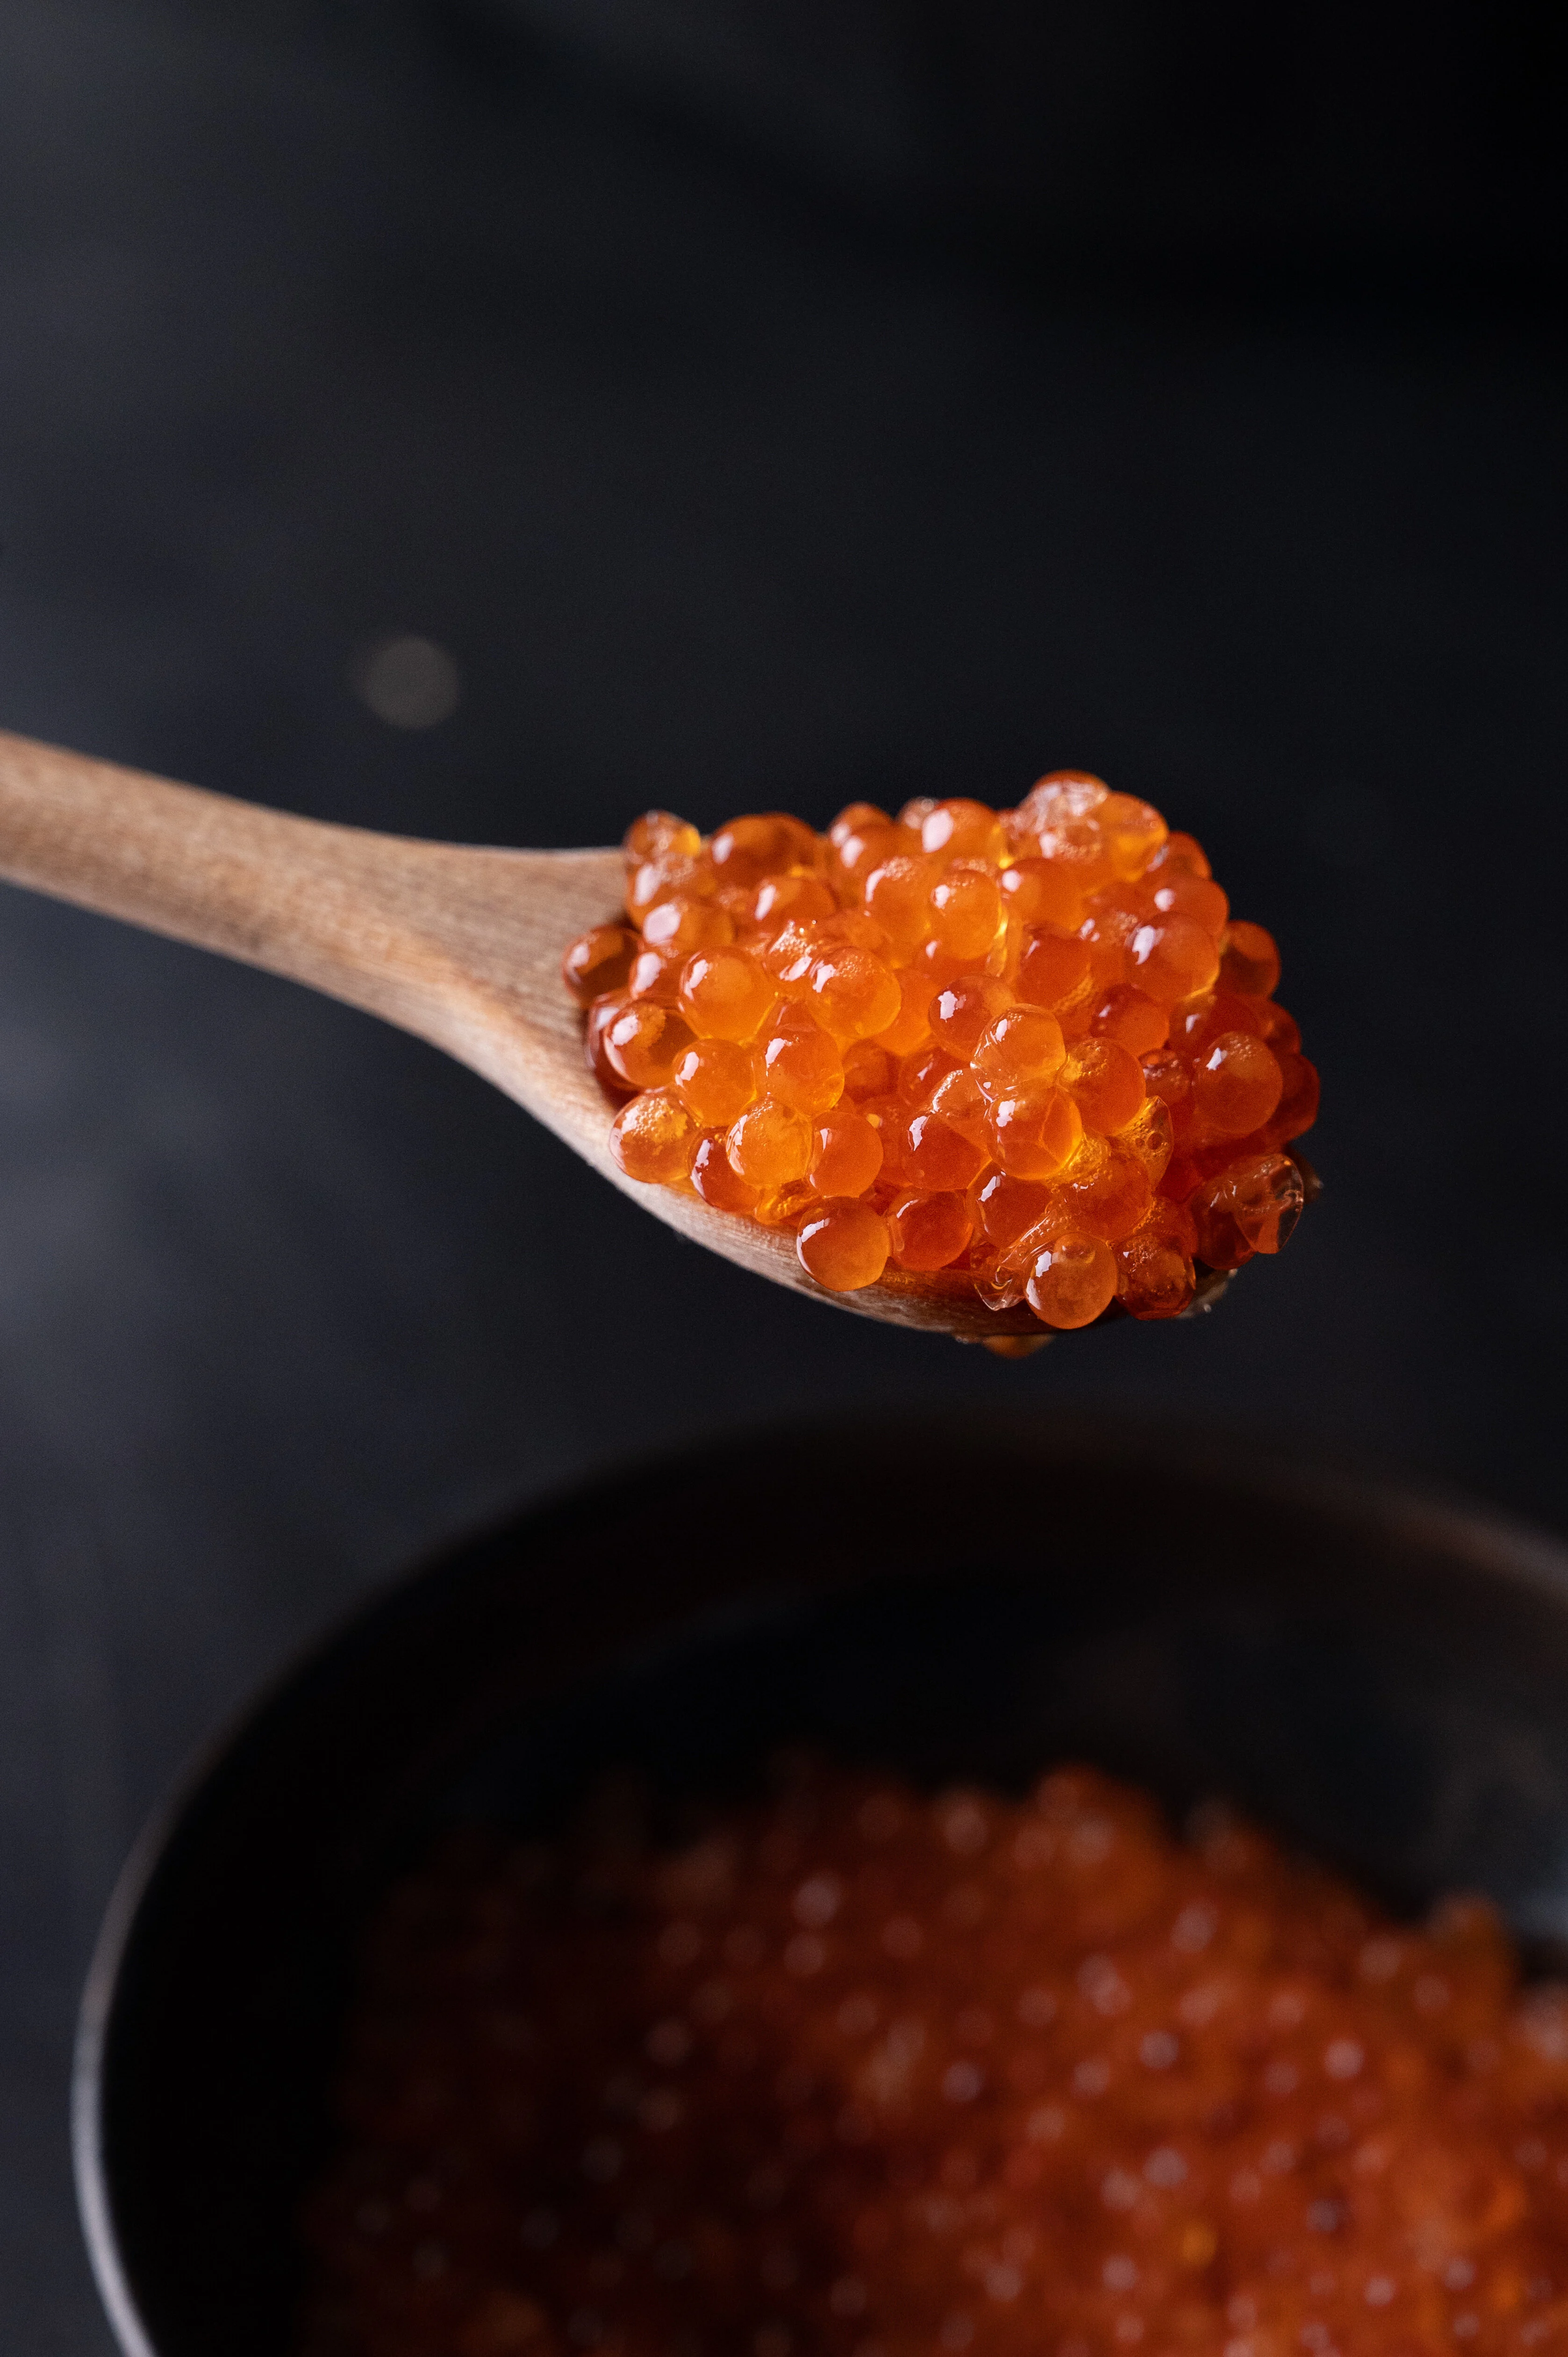 Smoked Trout Roe by Emil Bertilsson